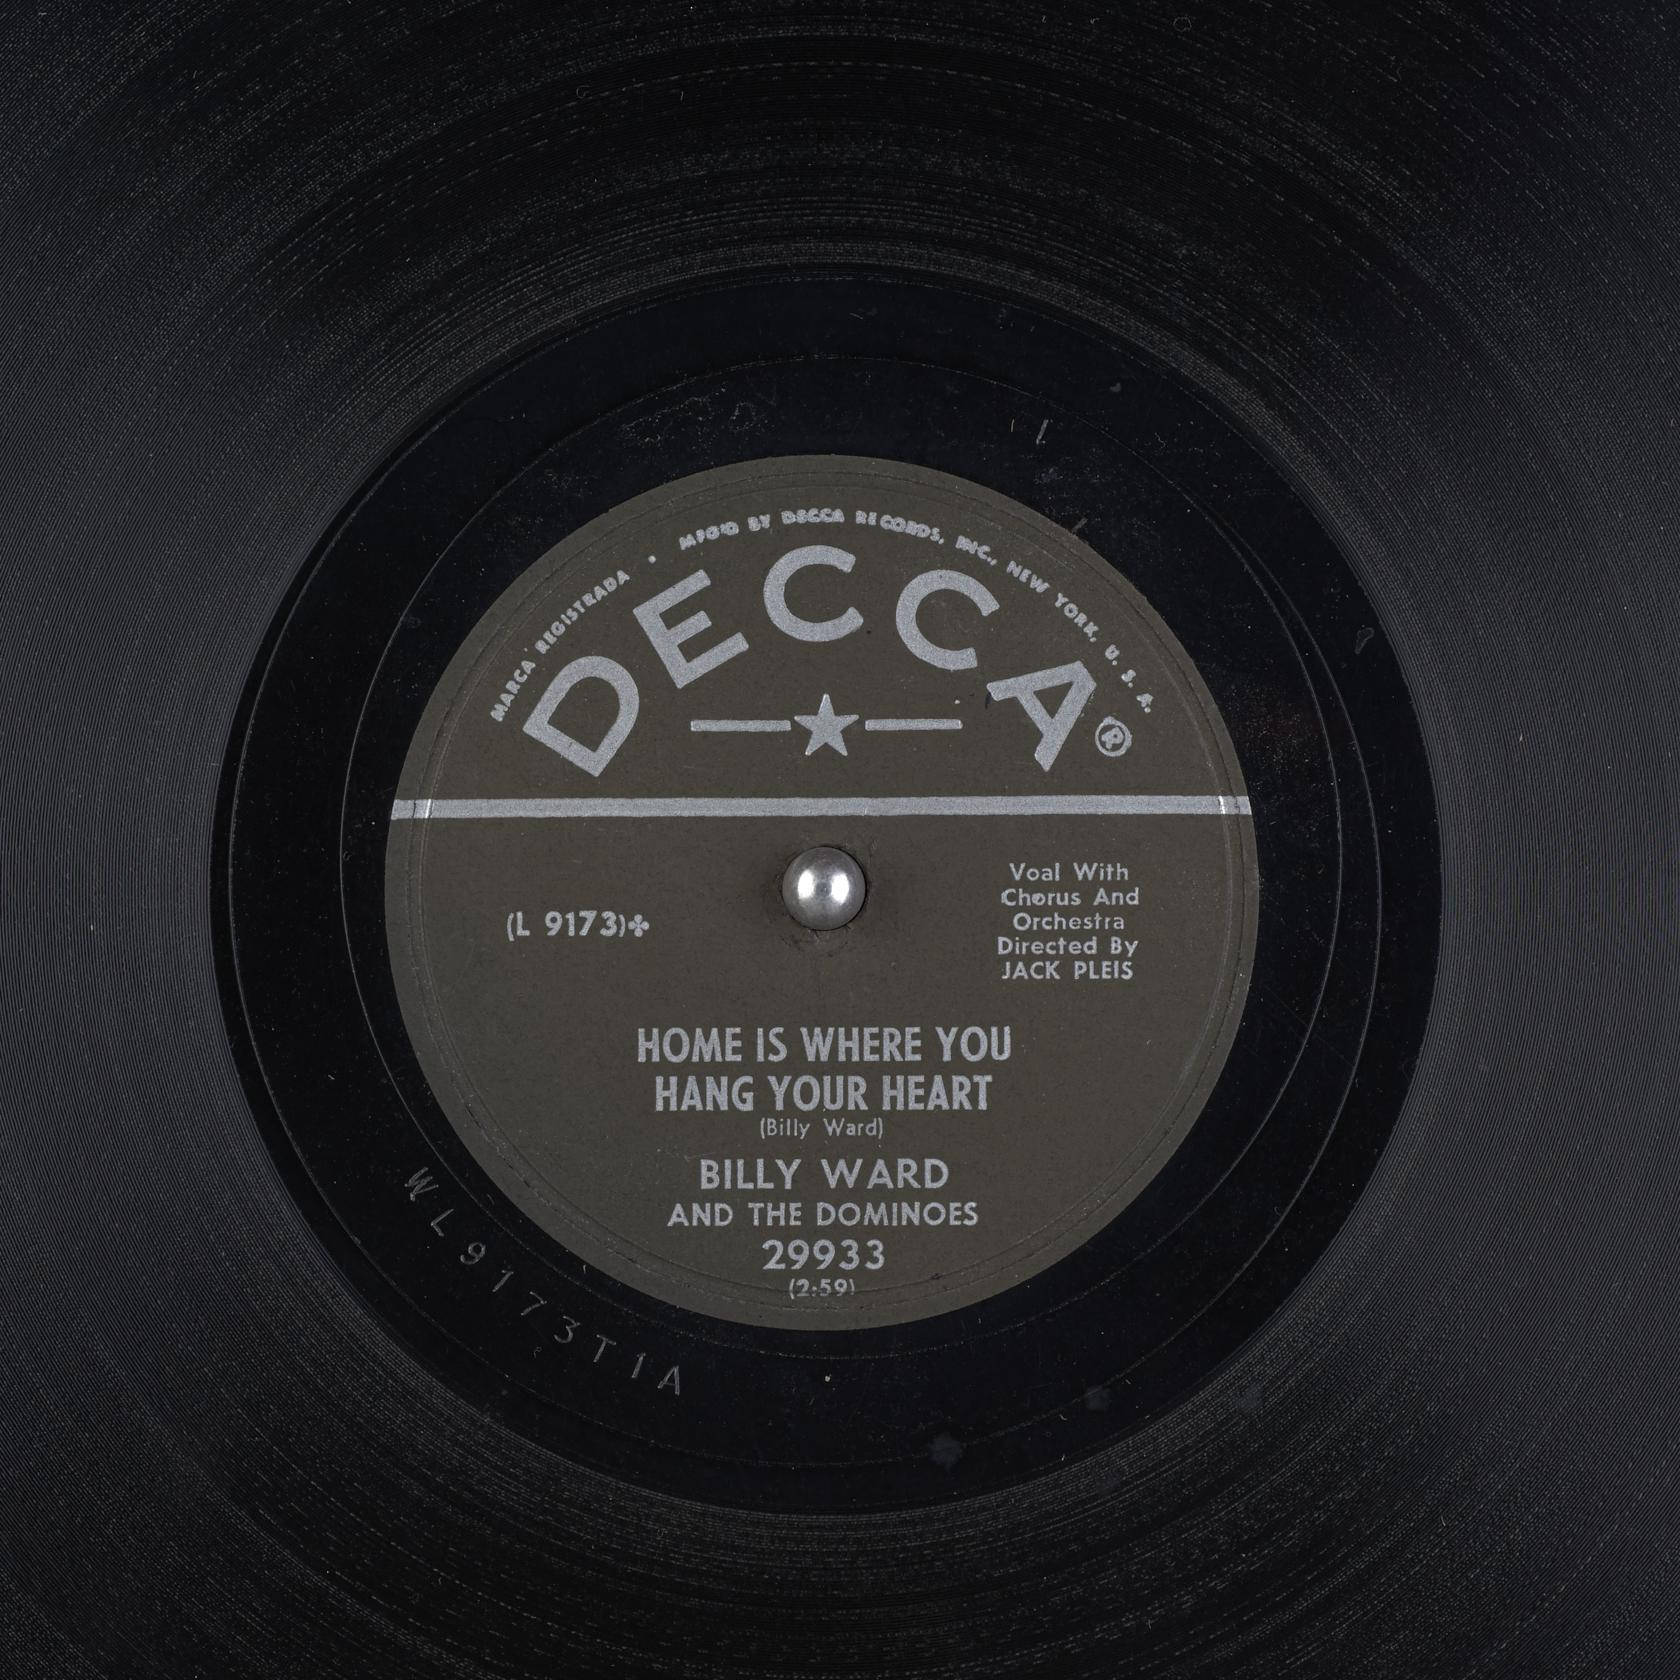 Billyward And The Dominoes Decca Vinyl Records - Billy Ward Och The Dominoes Decca Vinylskivor Wallpaper